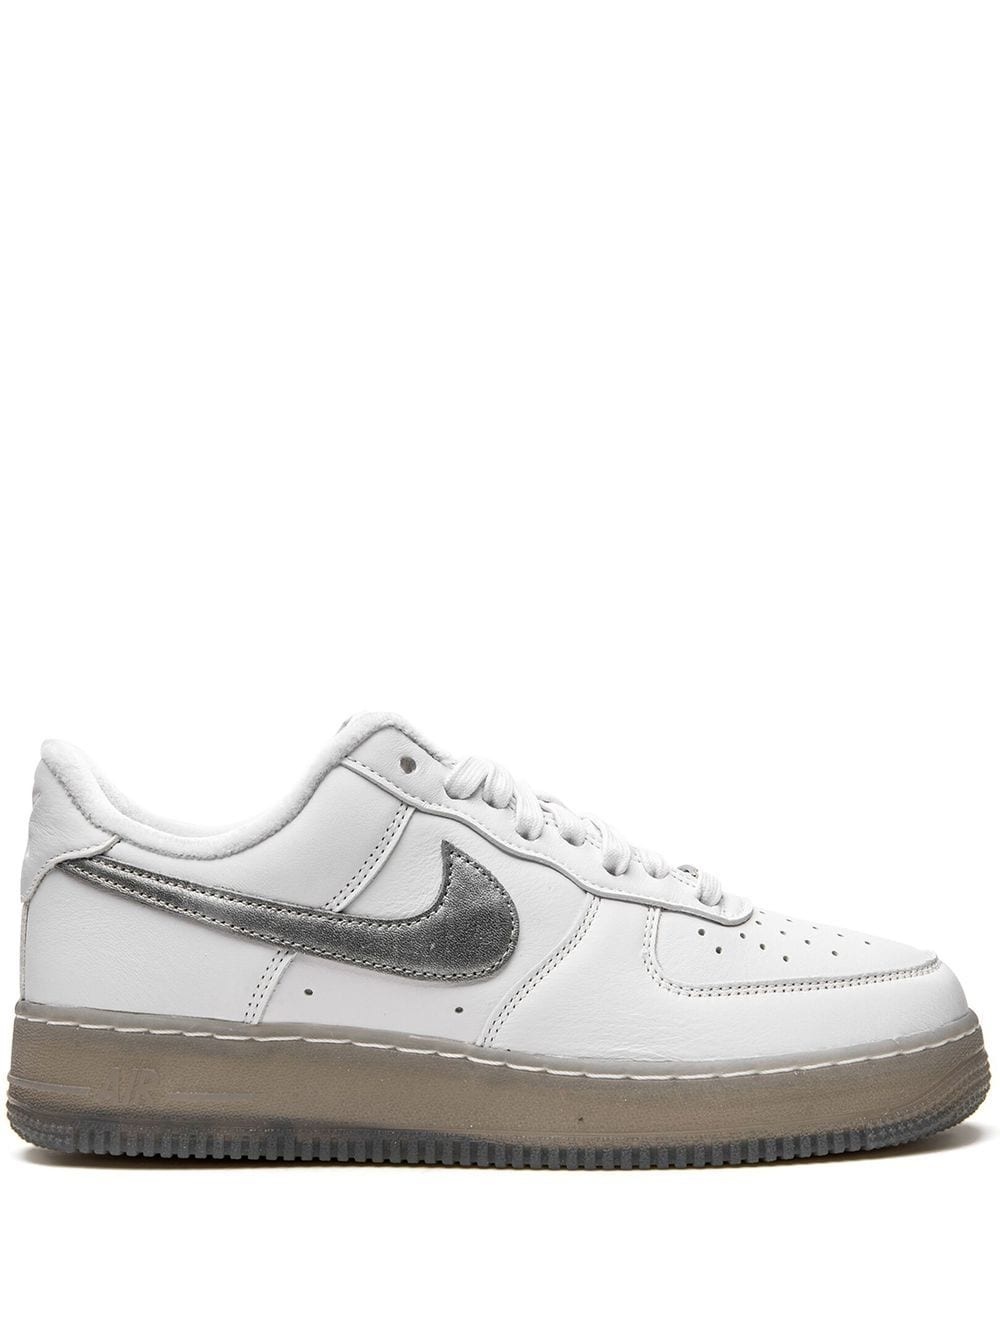 Air Force 1 "White/Metallic Silver" sneakers - 1